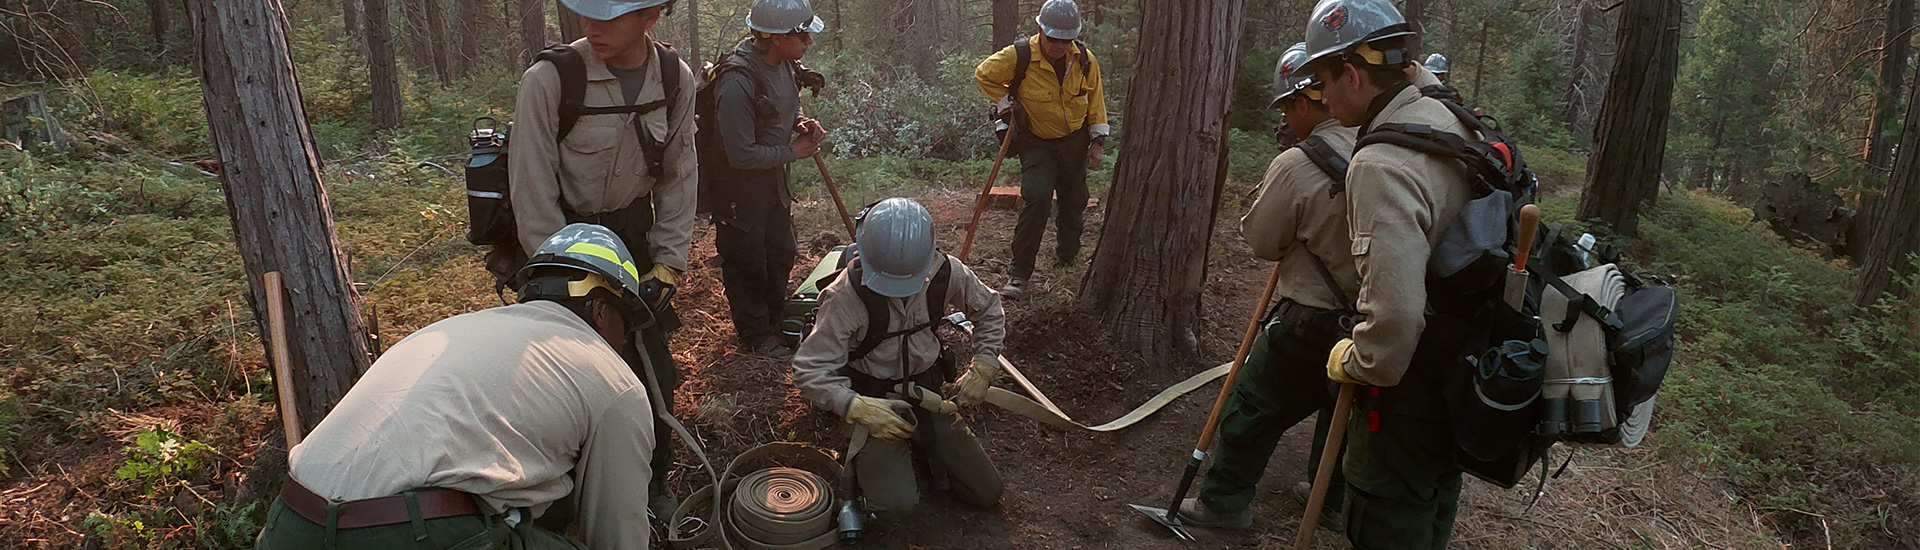 Wildland fire students in forest